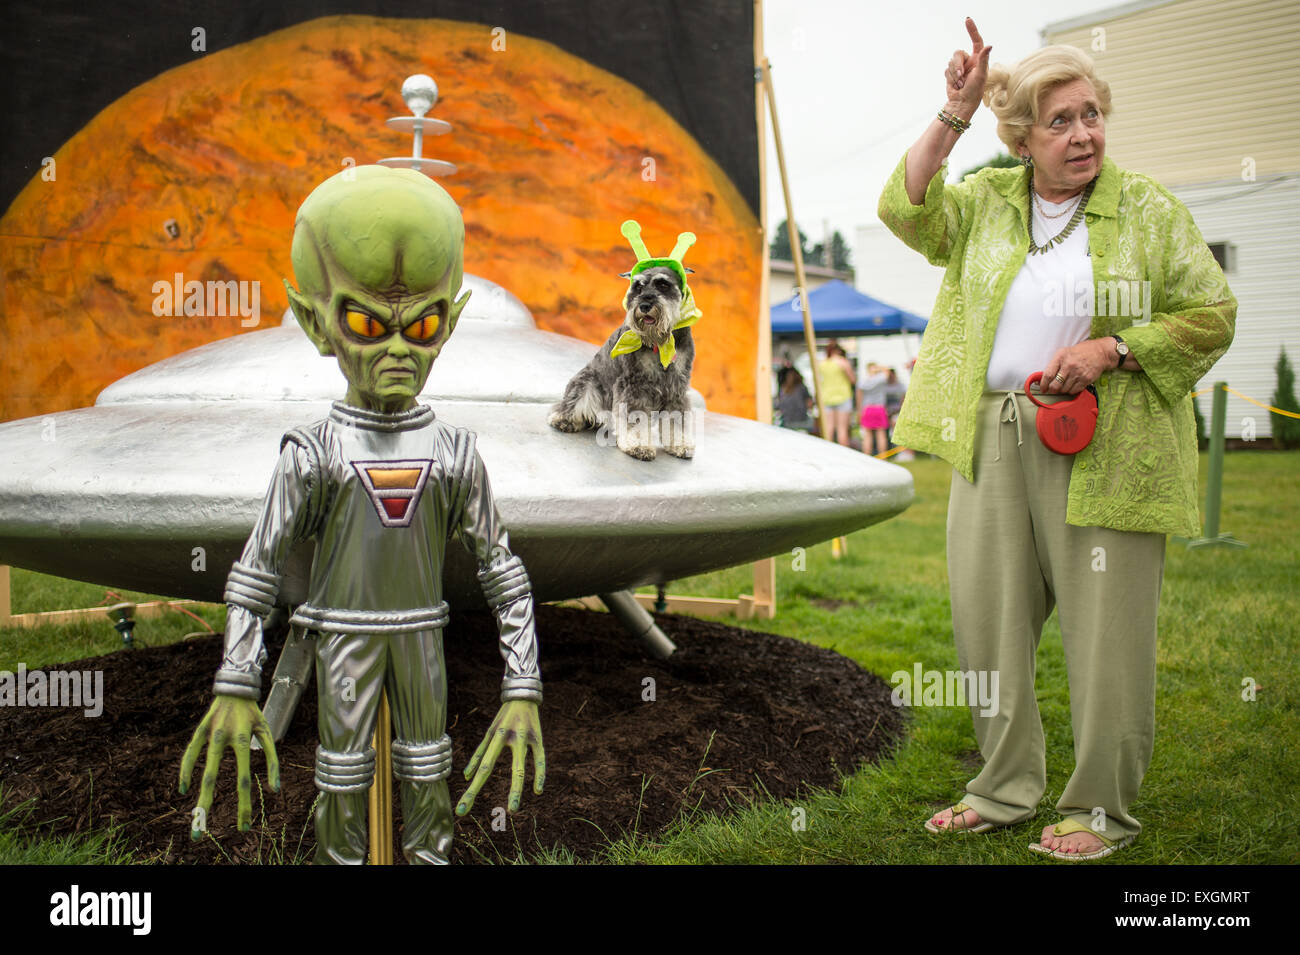 Sue Morris and her dog &quot;Pepper&quot; are seen with a model of a spacecraft and alien used for photos during the Mars New Year's celebration Saturday, June 20, 2015, in Mars, Pennsylvania. The town is hosting three days of Science, Technology, Engineering, Arts and Mathematics (STEAM) activities. Stock Photo